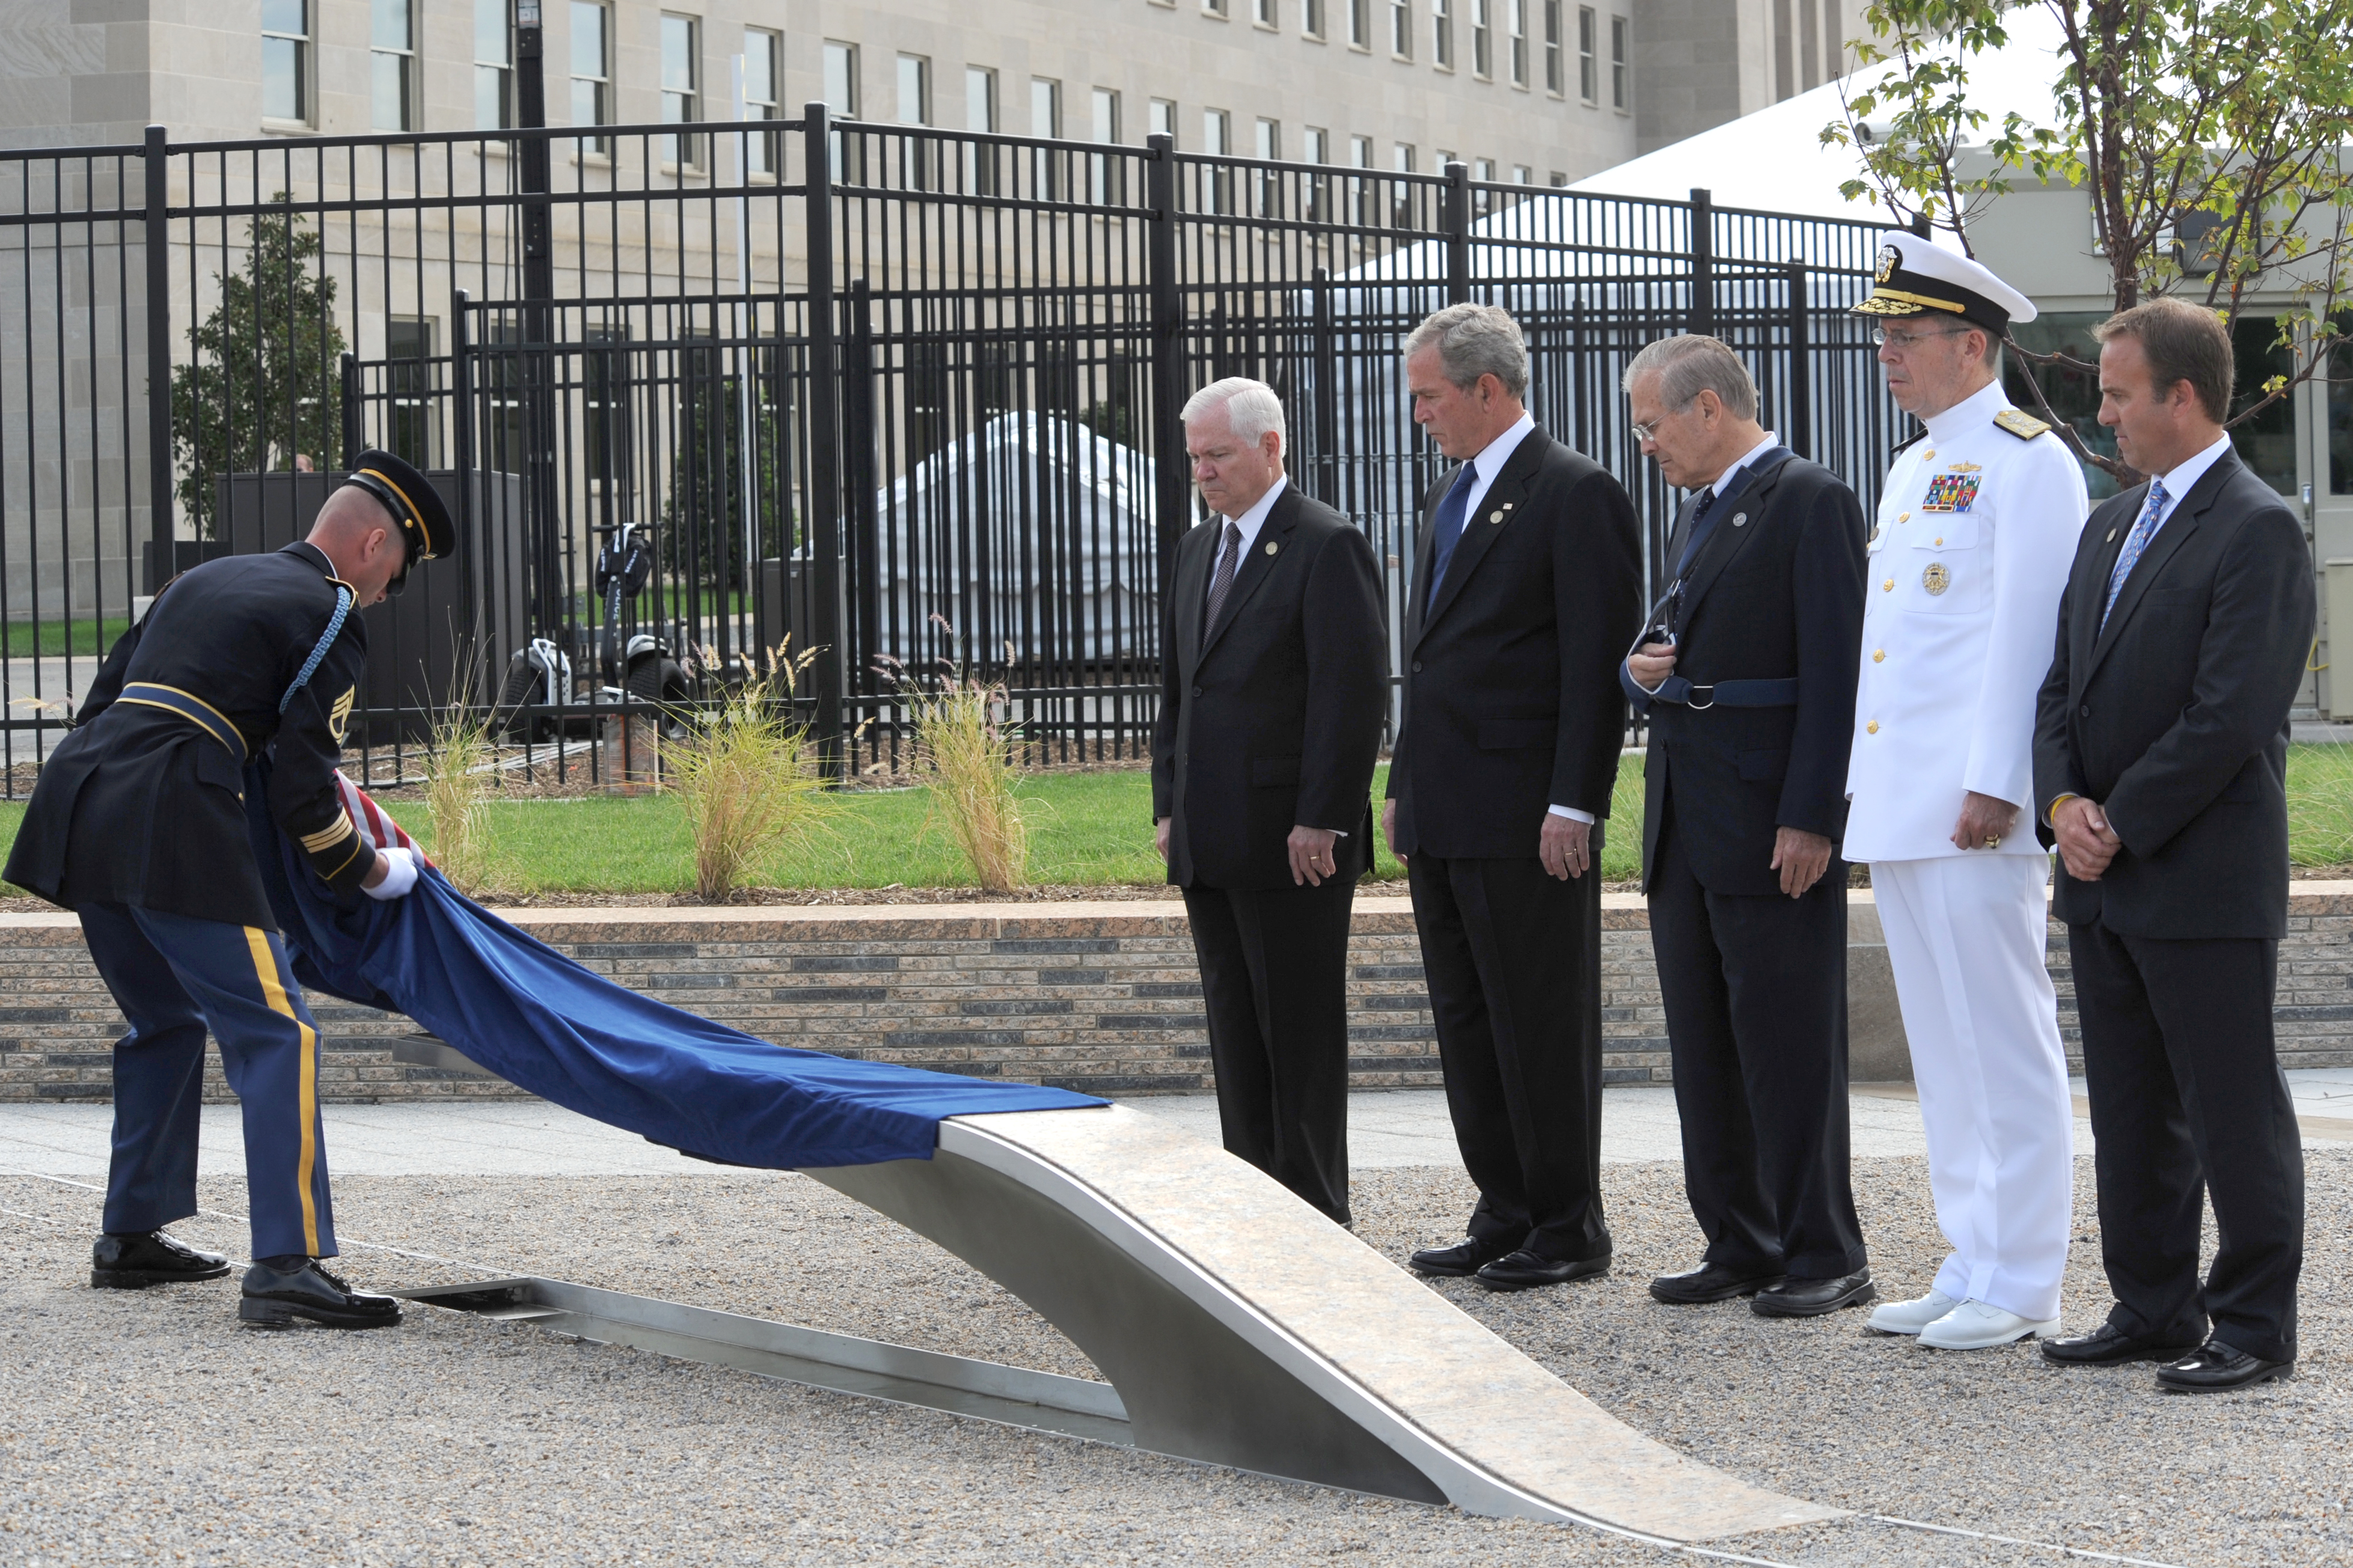 Pentagon Memorial opens to public > Air Force > Article Display